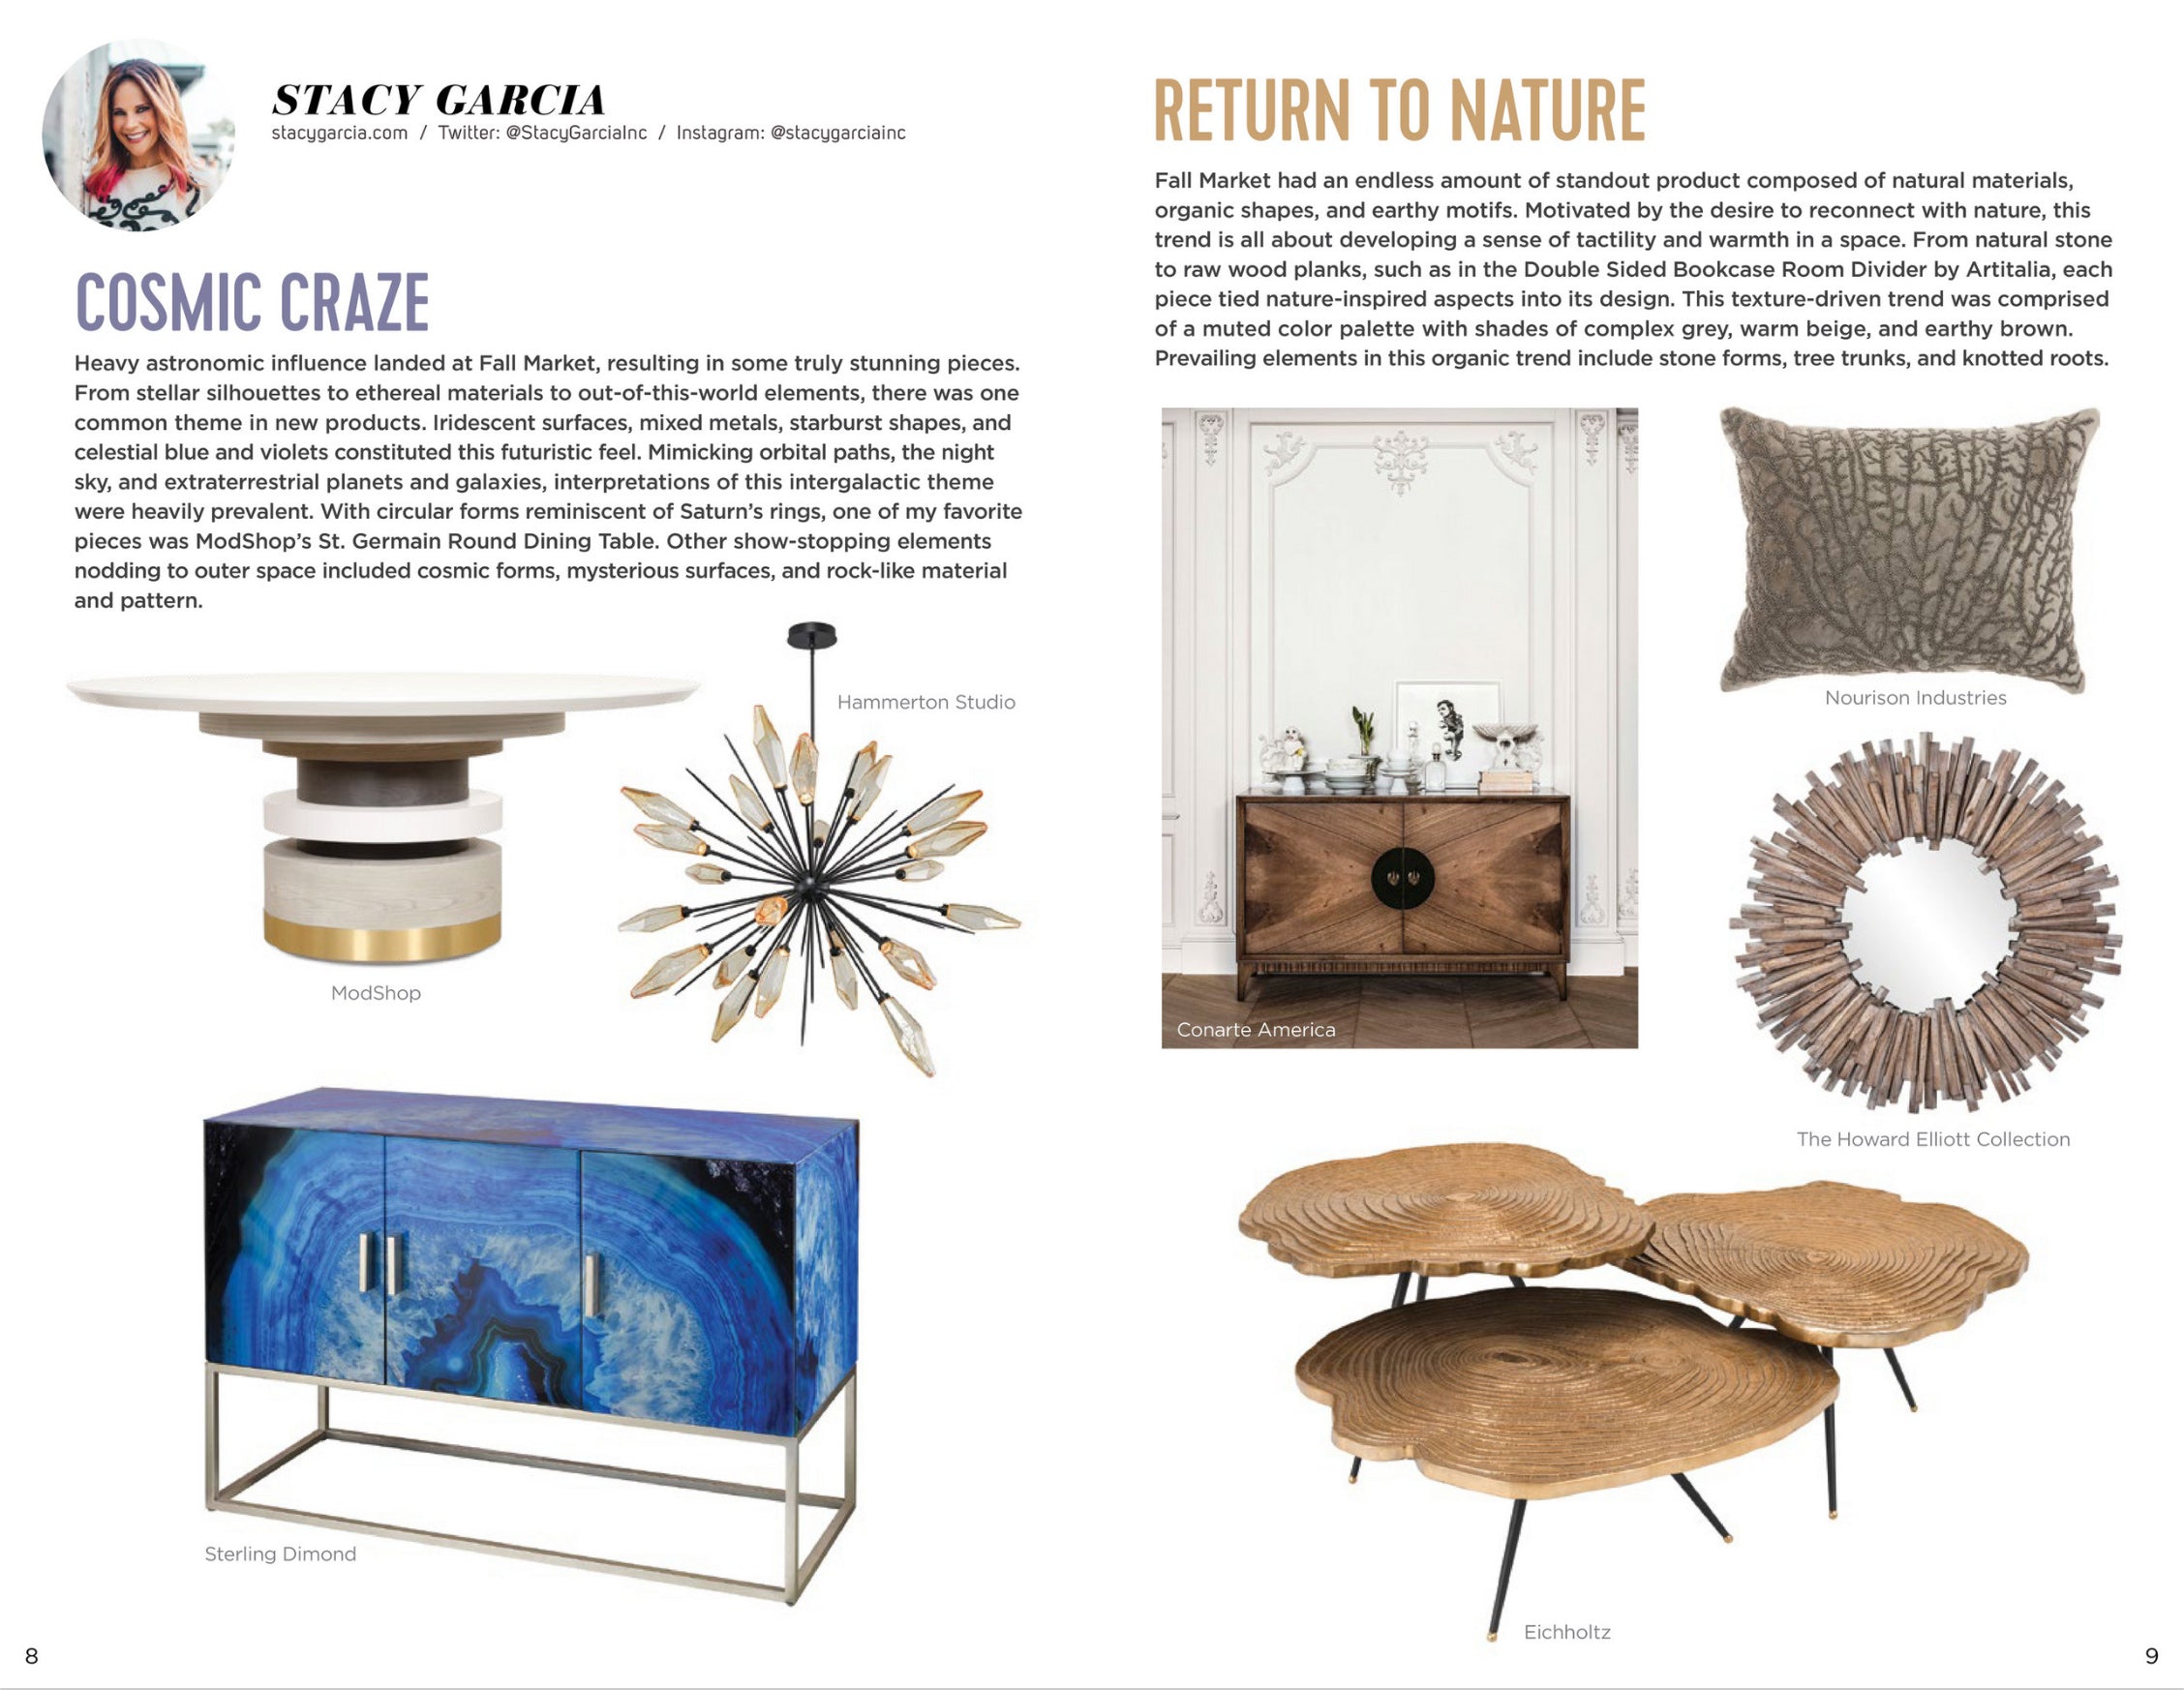 high point market style report featuring stacy garcia pick of modshop's st. germaine dining table